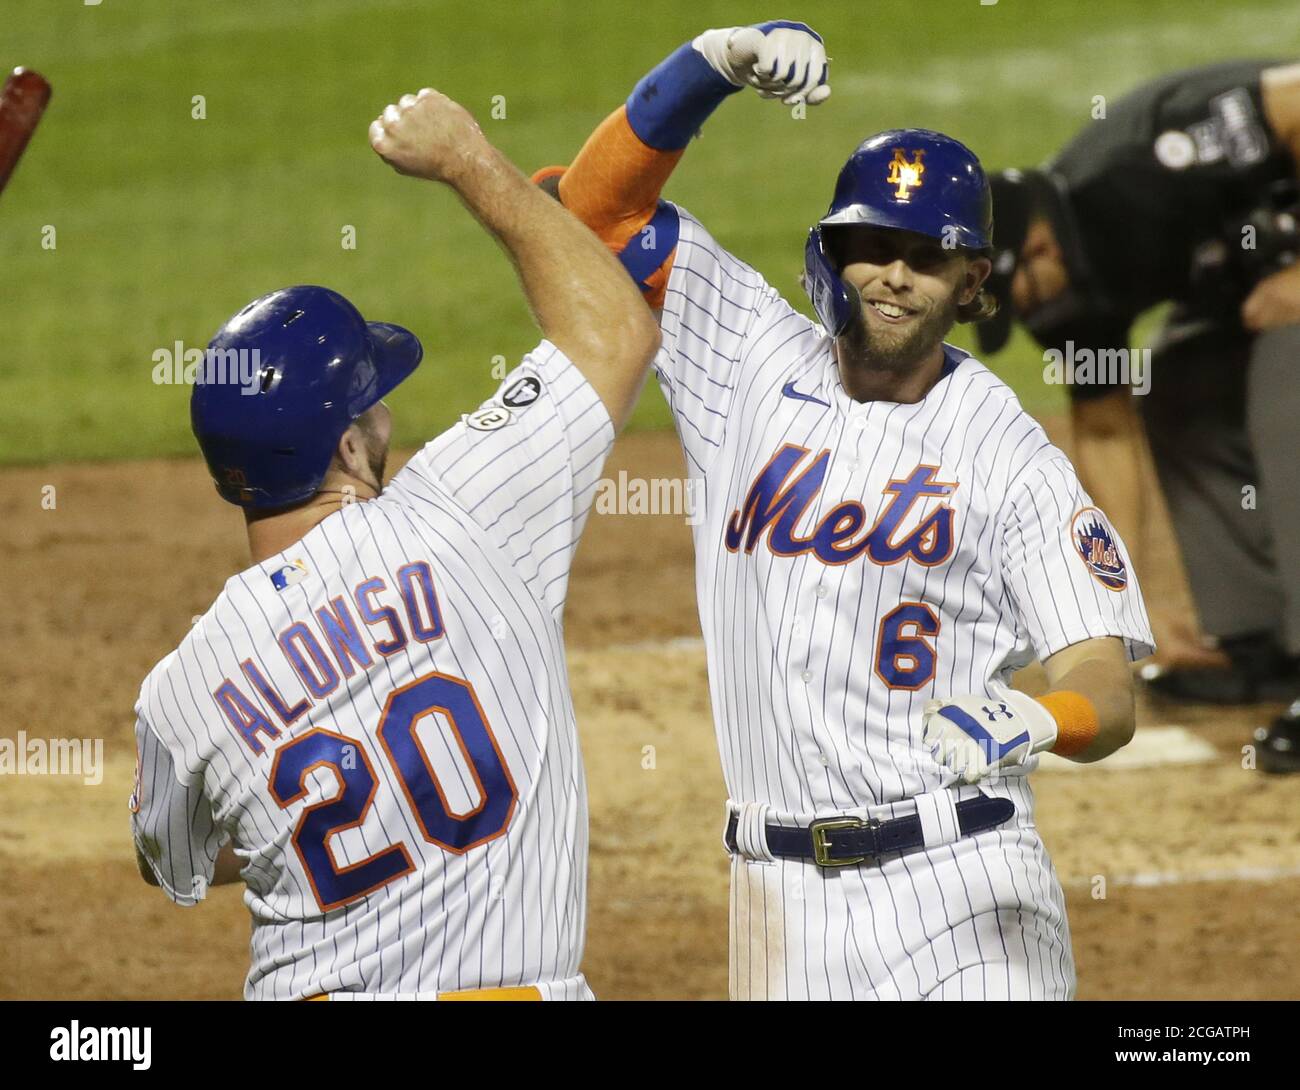 Queens, United States. 09th July, 2020. New York Mets Jeff McNeil